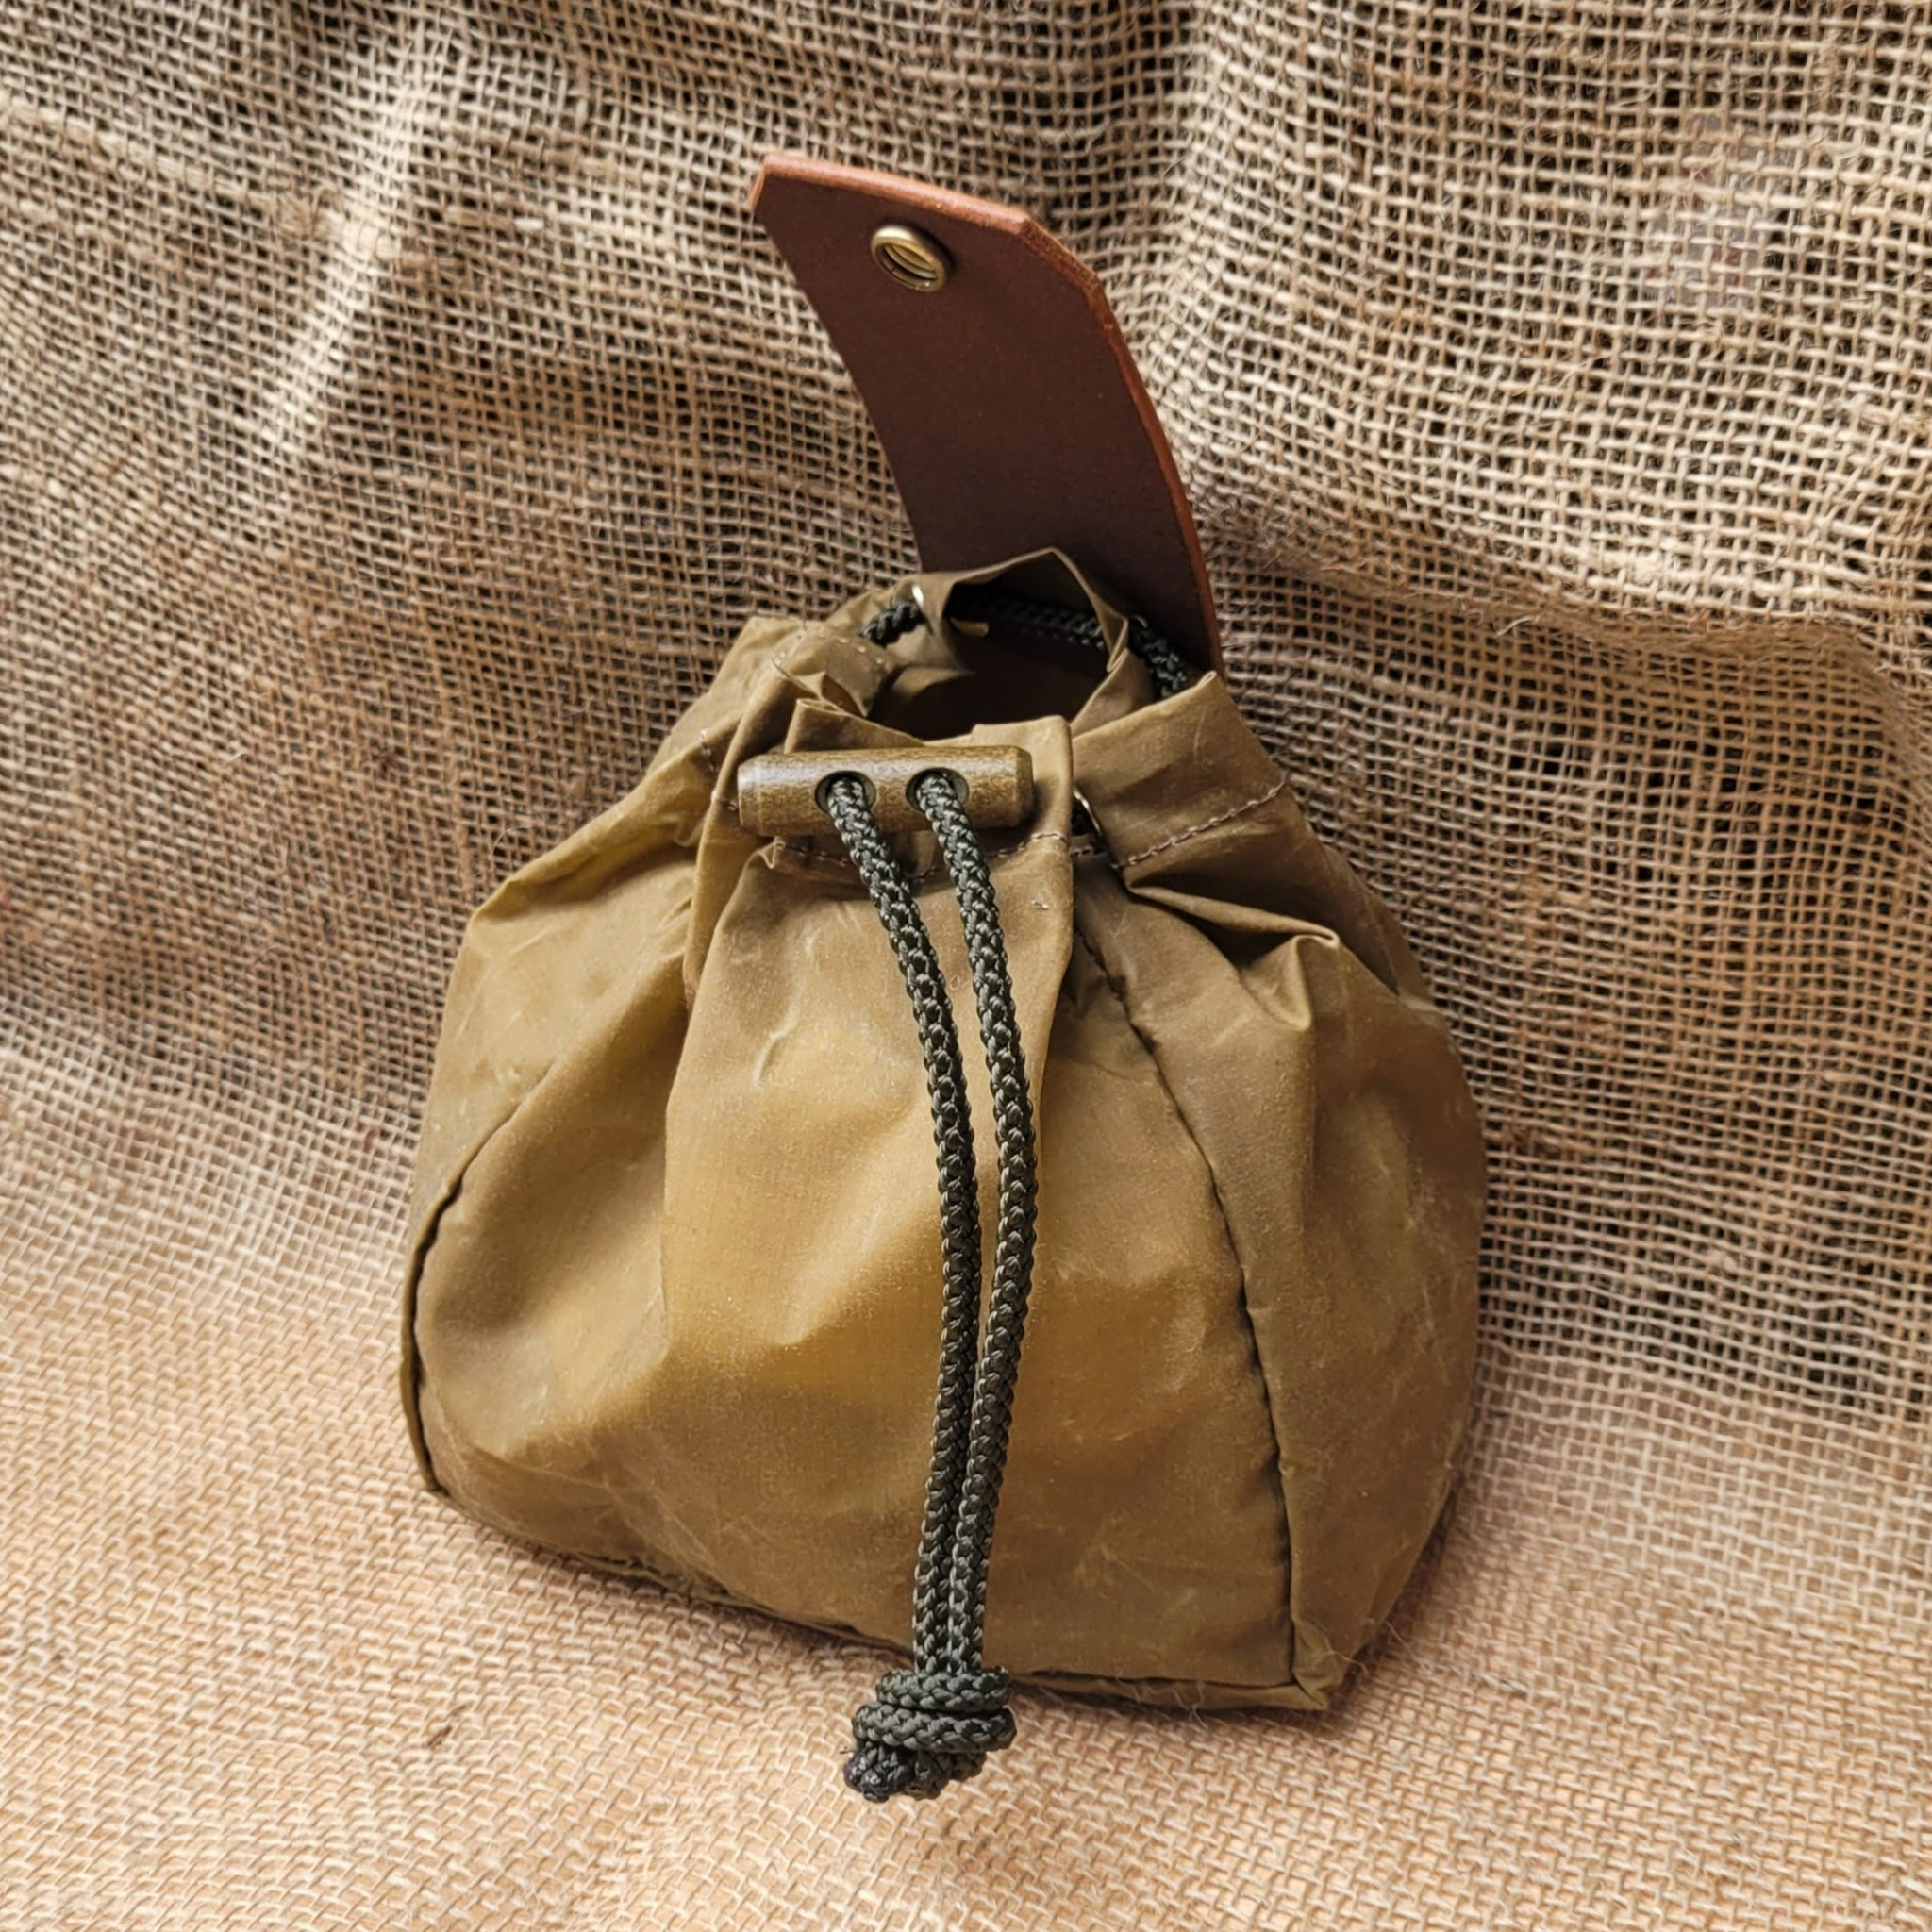 Forager dump pouch made from wax canvas and leather, used for foraging in the woods